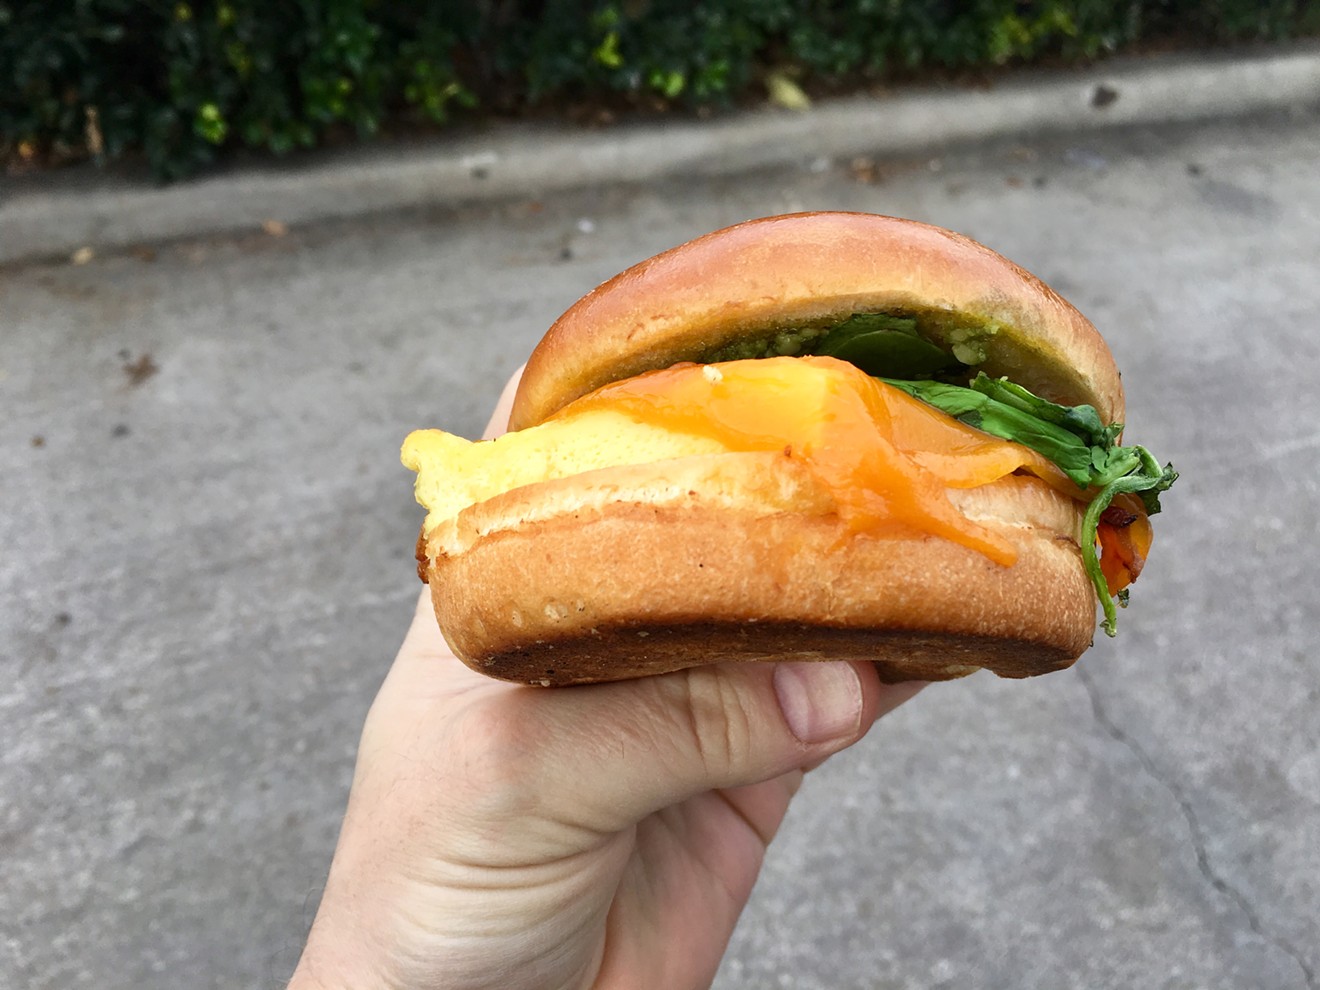 The breakfast sandwich at White Rock Coffee — bacon, egg, cheese, spinach and a pesto spread on a brioche bun — will set you back $4.25.